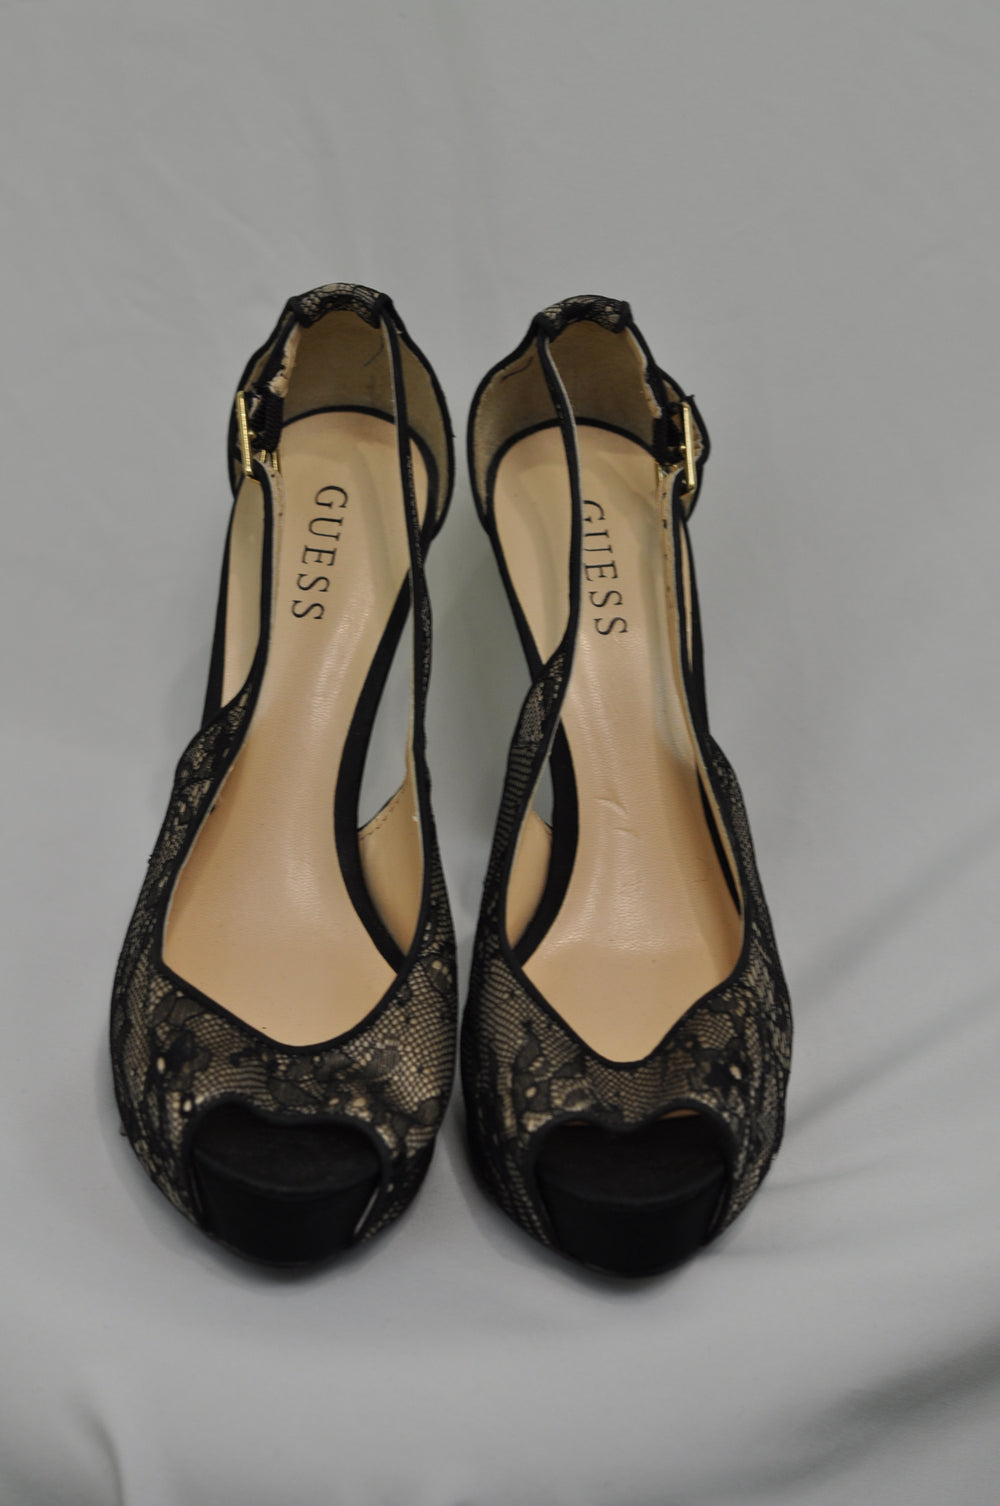 Guess Black Lace over Nude Stiletto Heels - Size 9